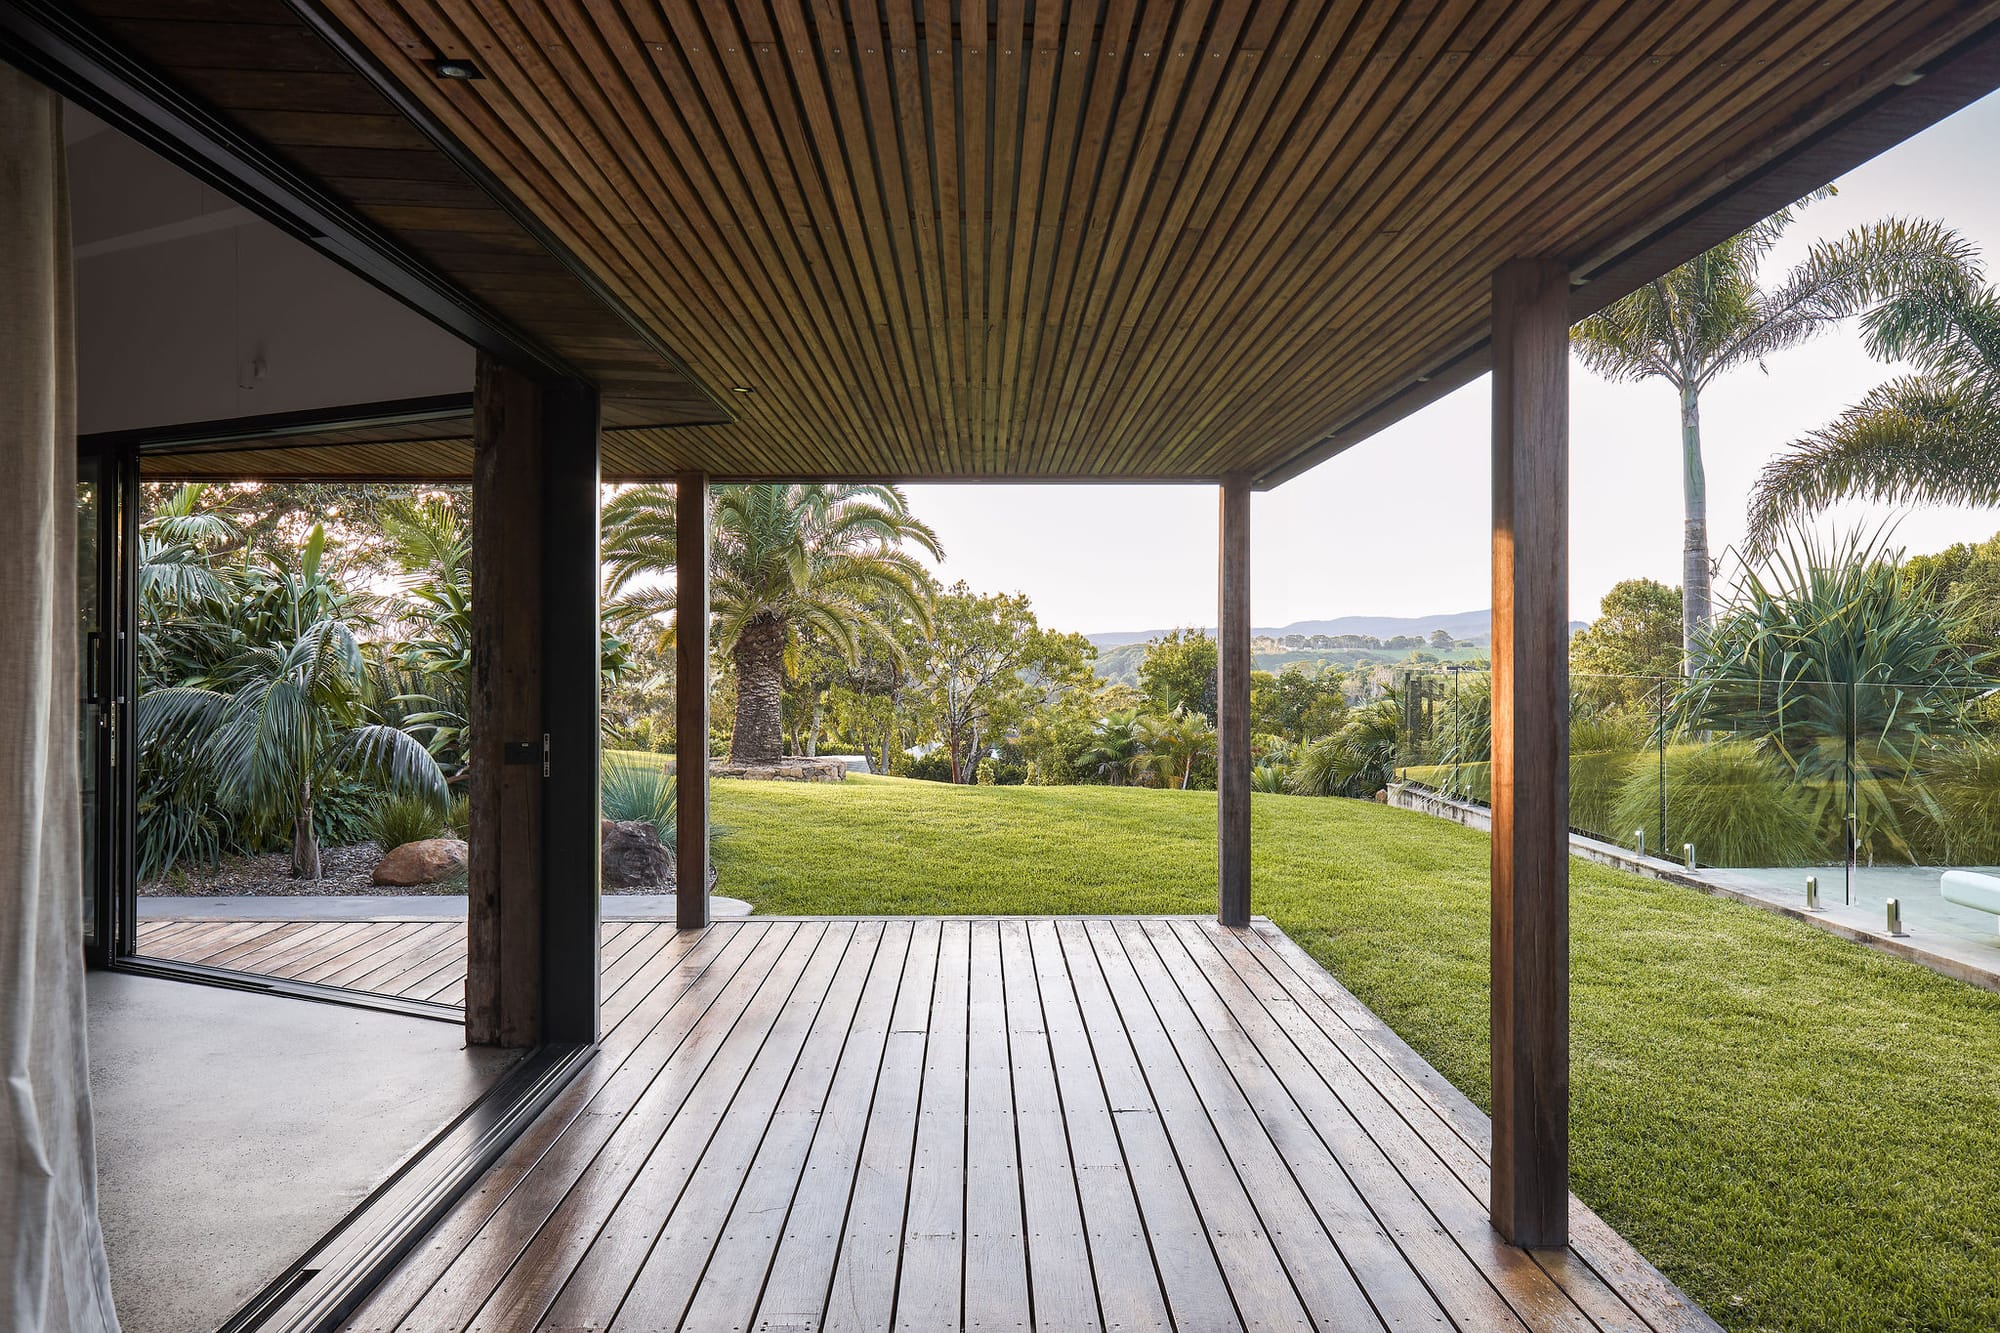 Rockpool Farm Byron Bay. Photography by Andy Macpherson. Timber wrap around deck with timber clad ceiling. Views over grassy hills, pool and lots of lush native plants.